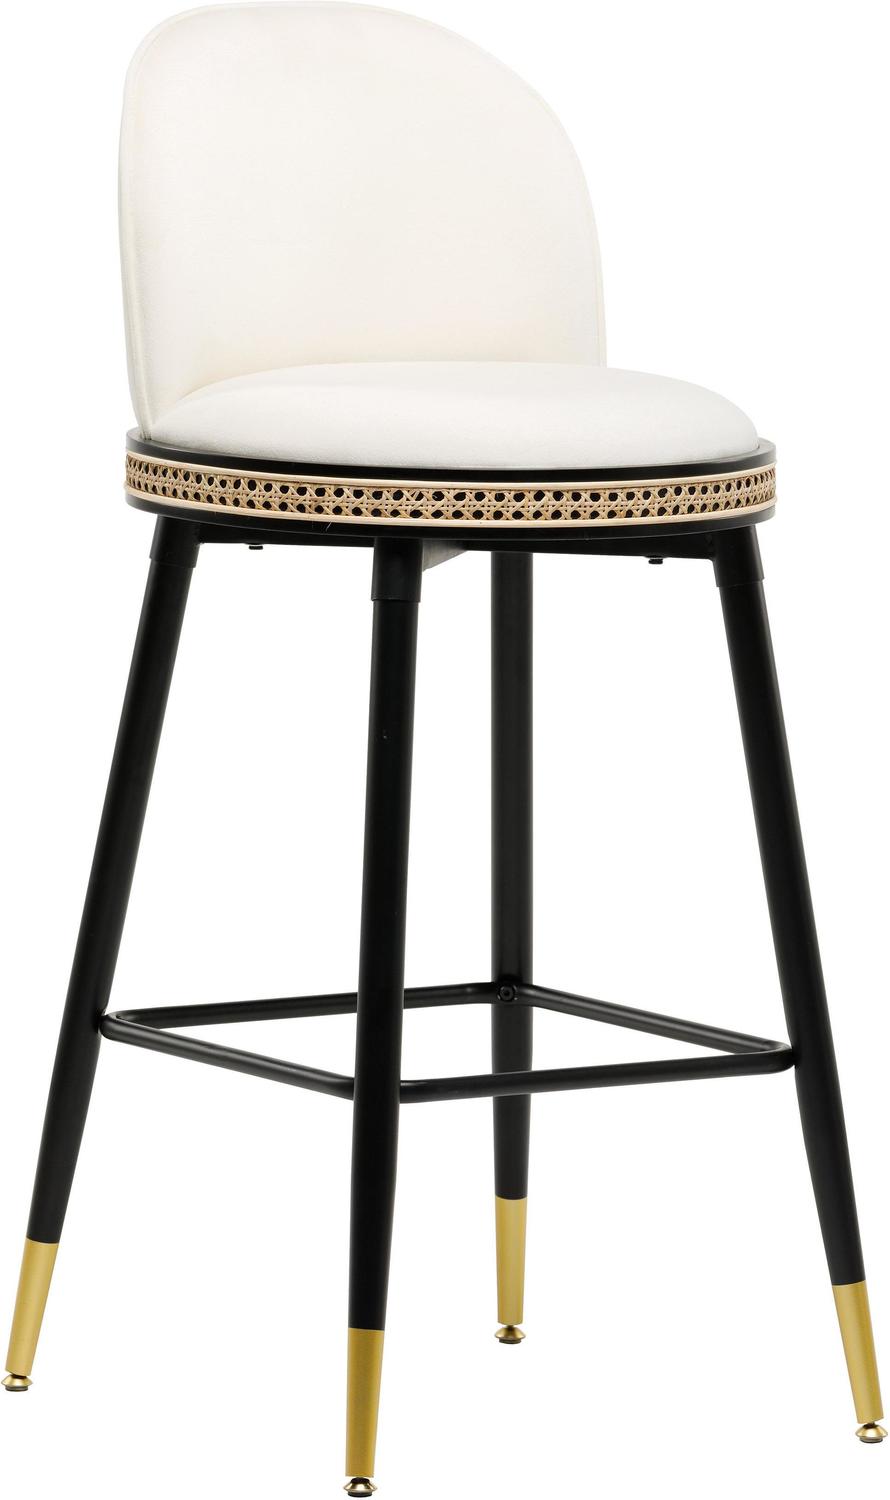 Tov Furniture Stools Bar Chairs and Stools Cream